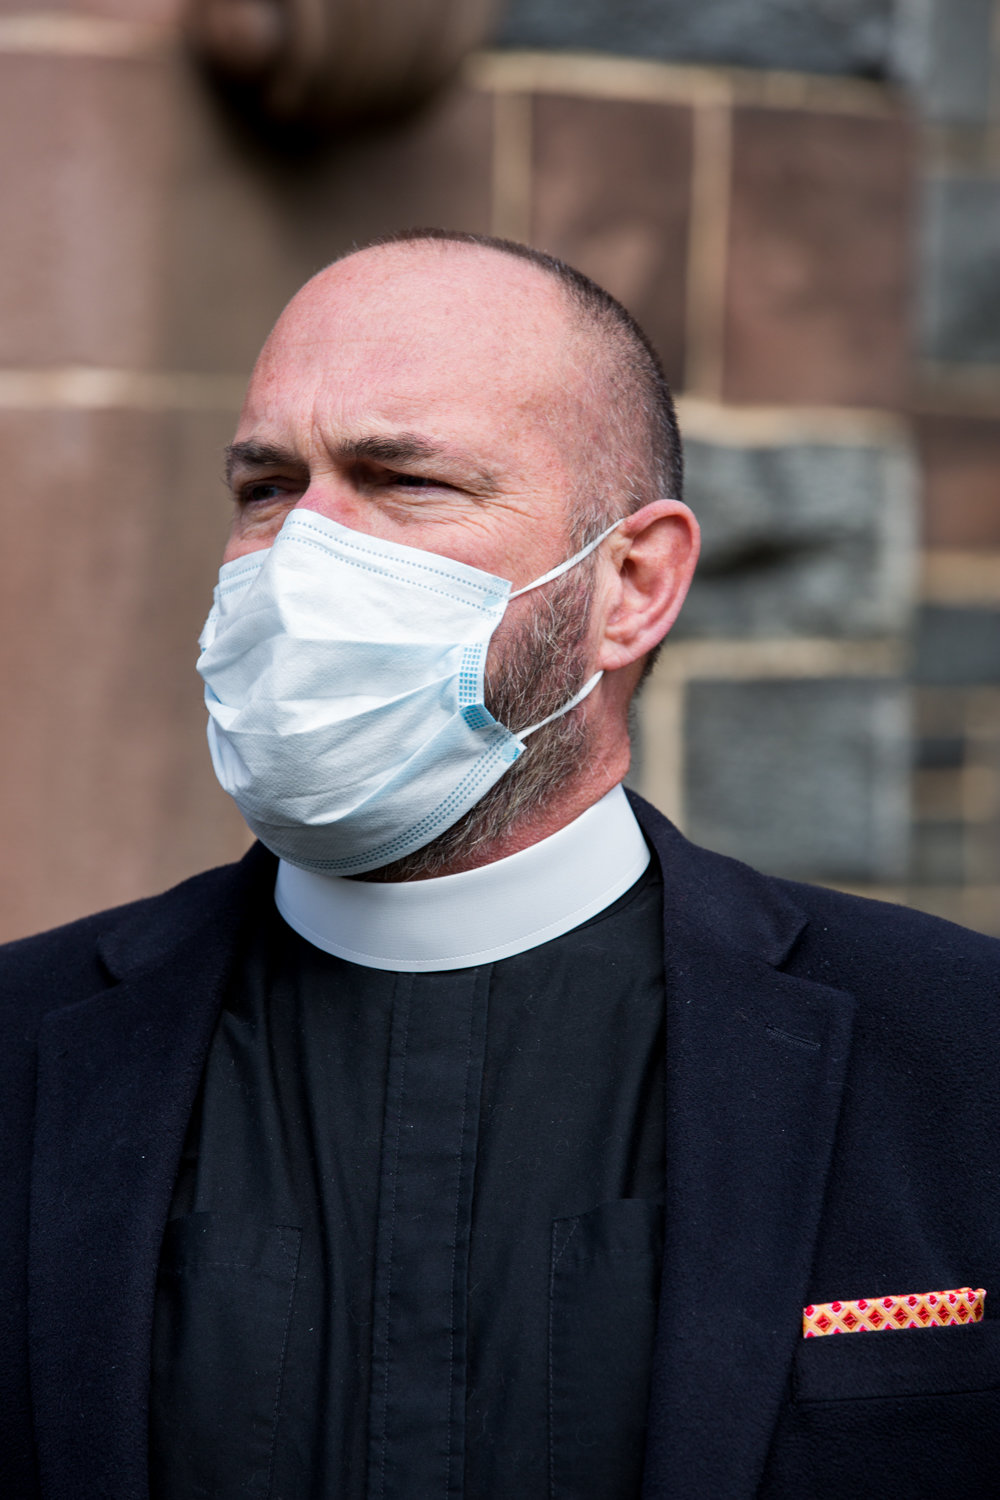 This past Easter was the first time the Rev. Andrew Butler did not spend the holiday in a church. The coronavirus pandemic forced churches, synagogues and mosques — as well as schools and businesses — to close their doors to help slow the spread of the virus that causes COVID-19.